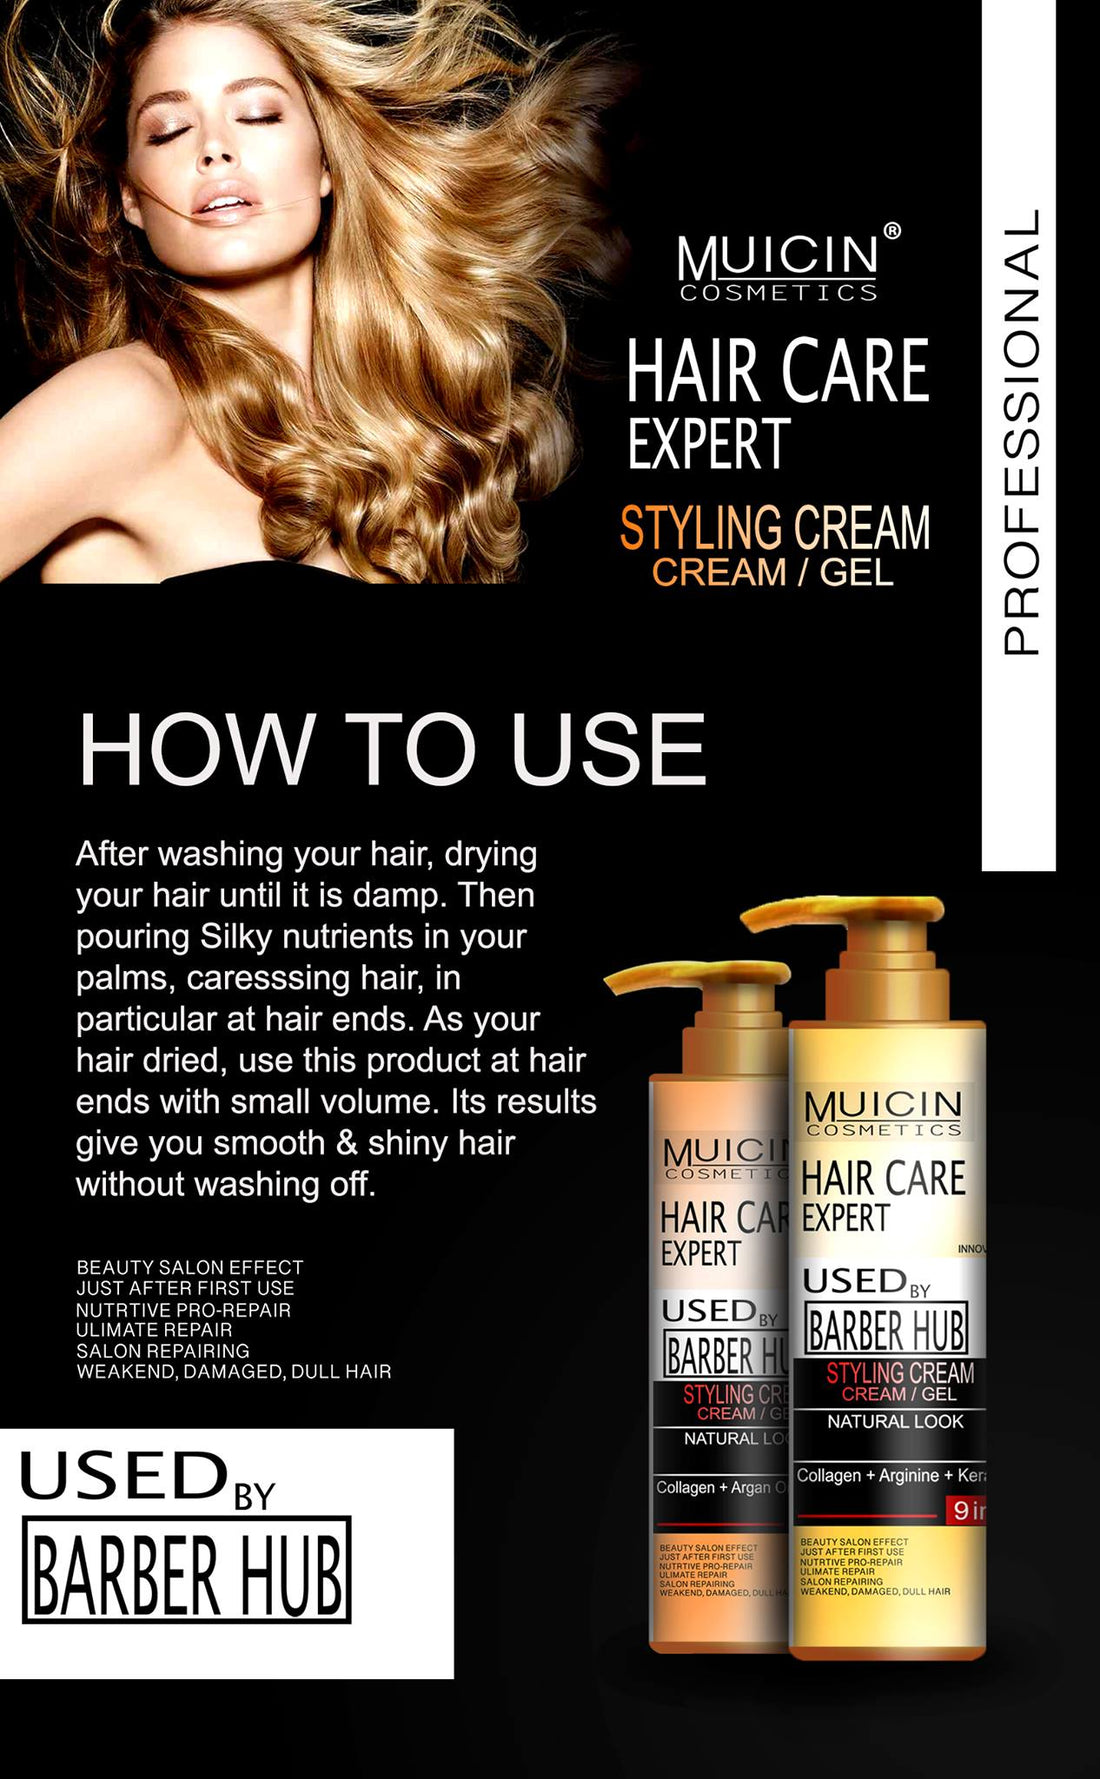 EXPERT FORMULA HAIR STYLING CREAM - PROFESSIONAL HOLD, NATURAL LOOK